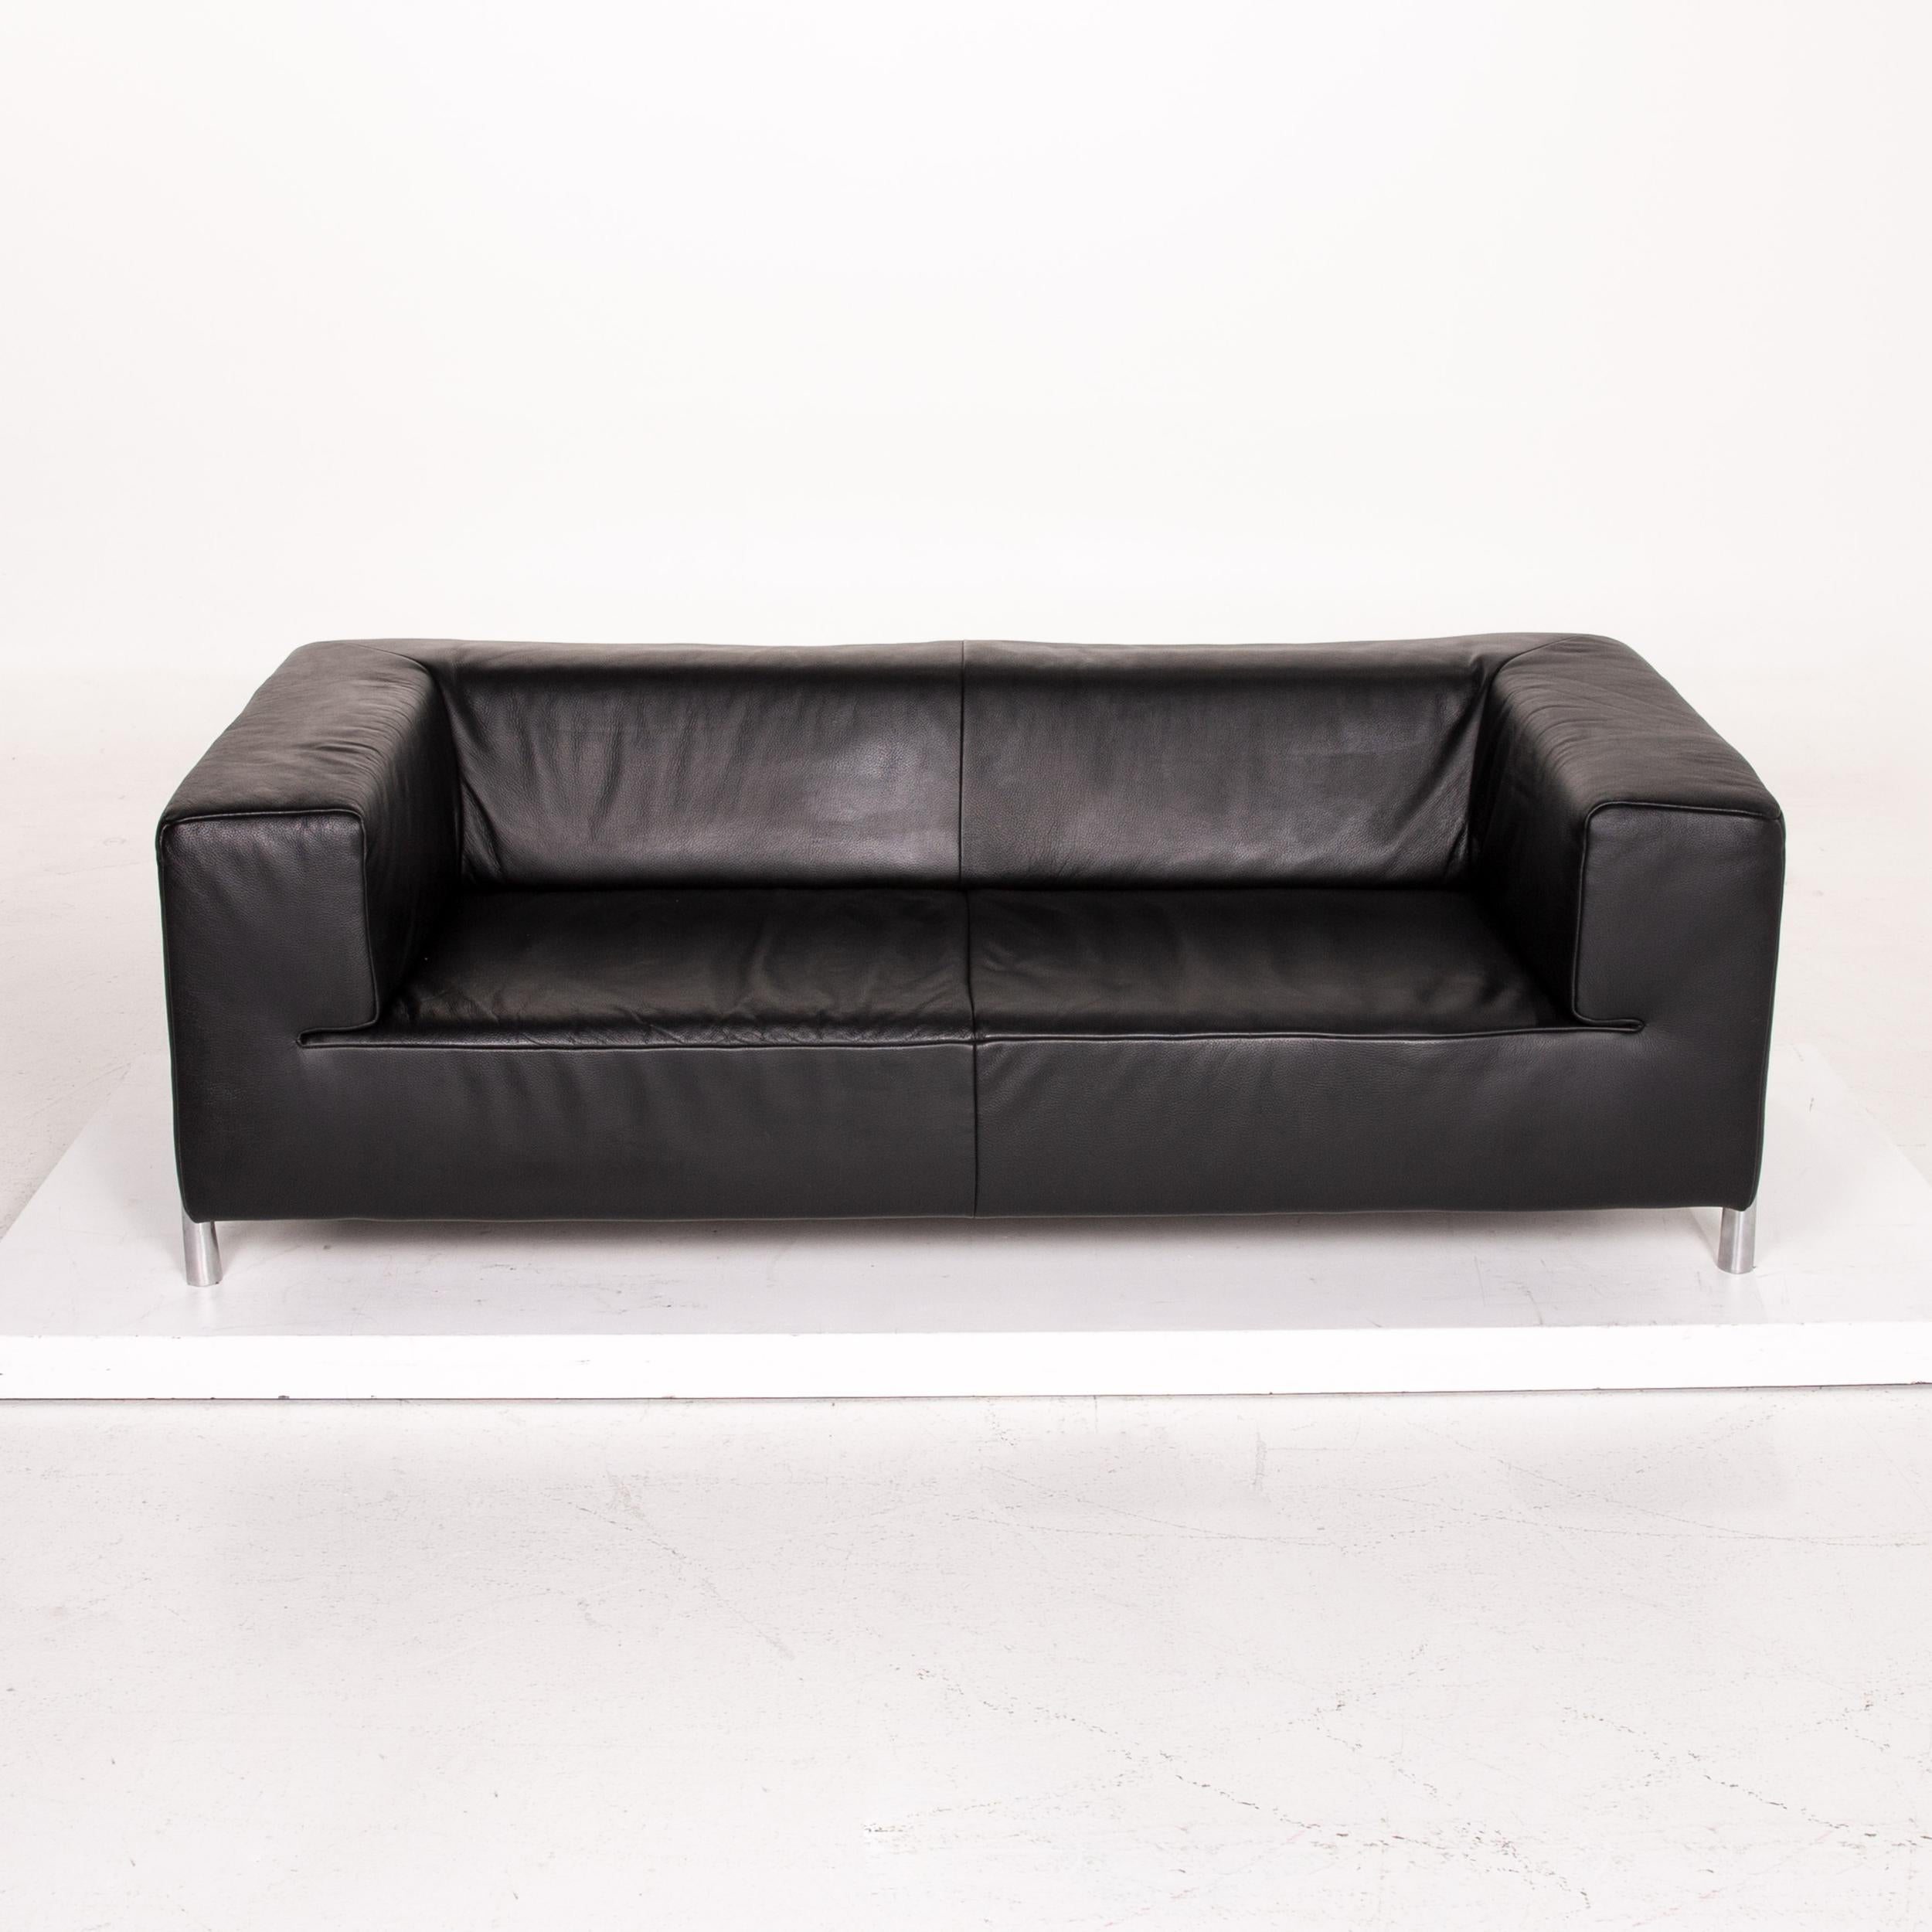 Koinor Genesis Leather Sofa Black Two-Seat Couch 2